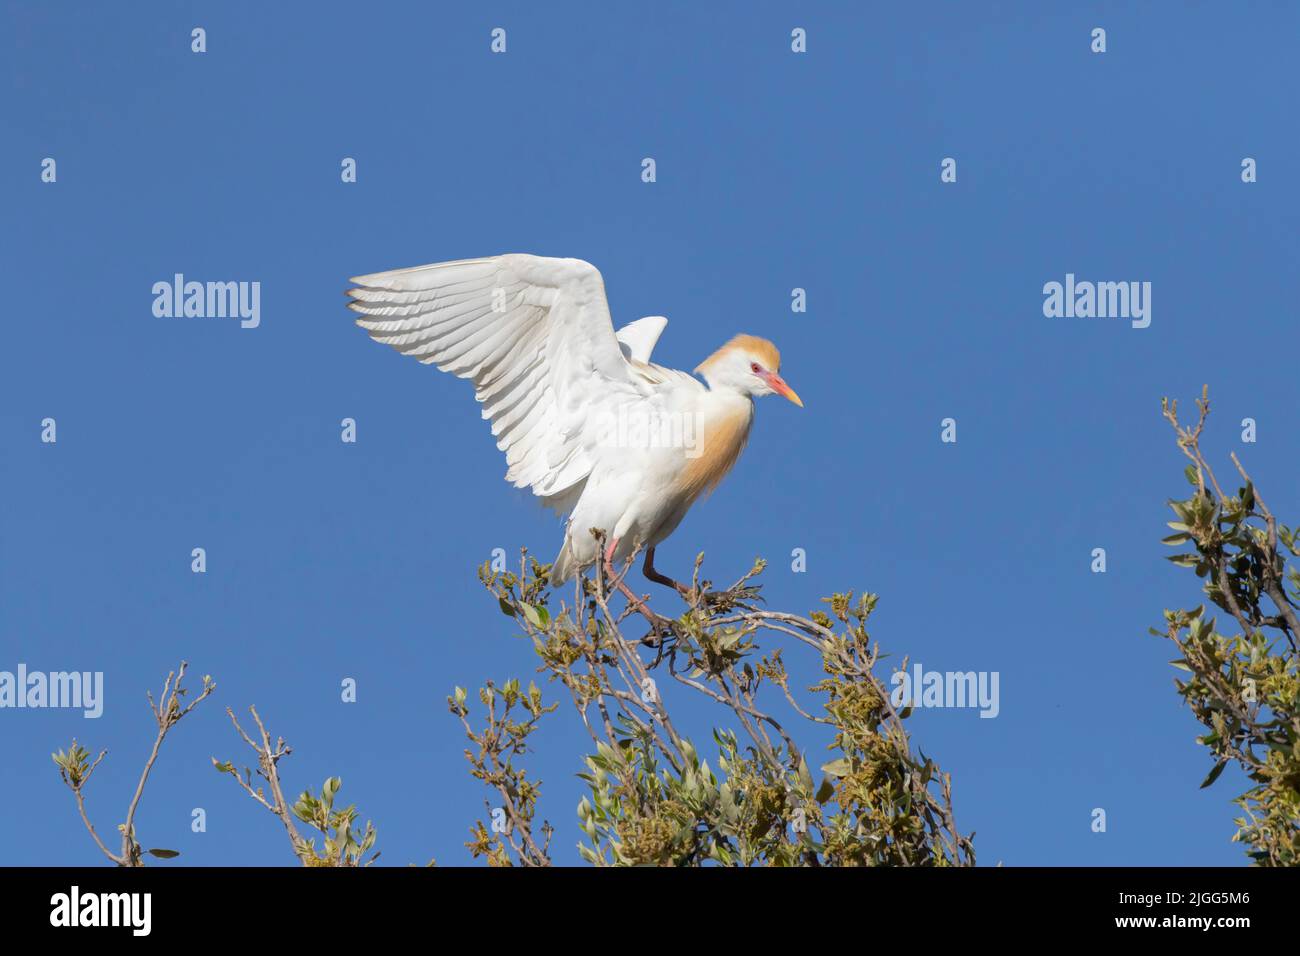 Adult Cattle Egret, Bubulcus ibis, in breeding plumage lands atop an oak tree in California's San Joaquin Valley. Stock Photo